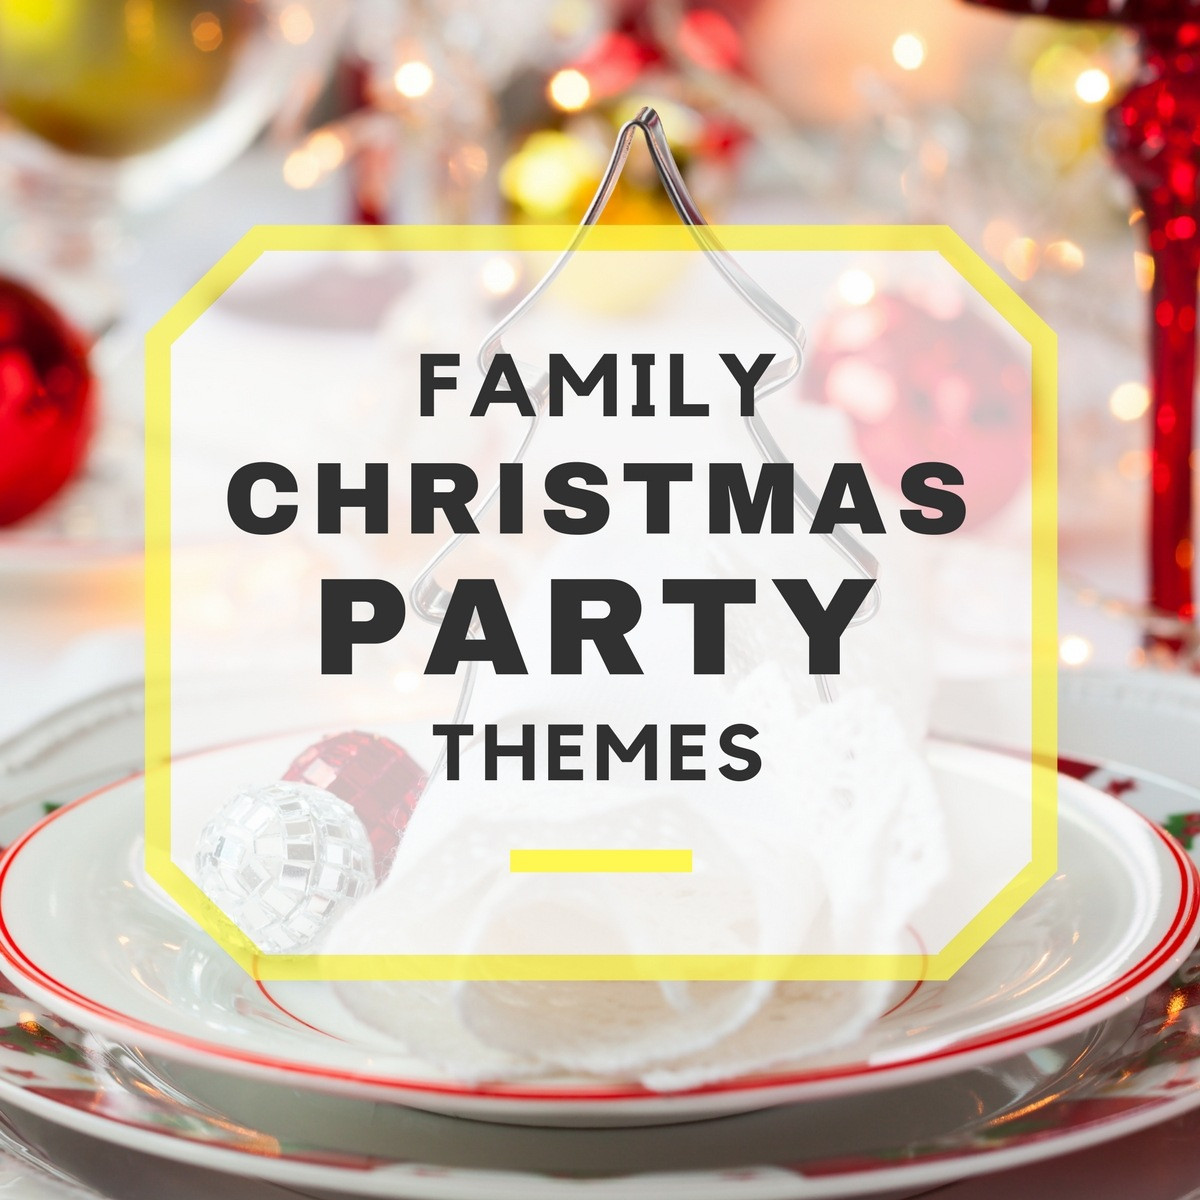 Christmas Party Ideas For Families
 Family Christmas Party Themes